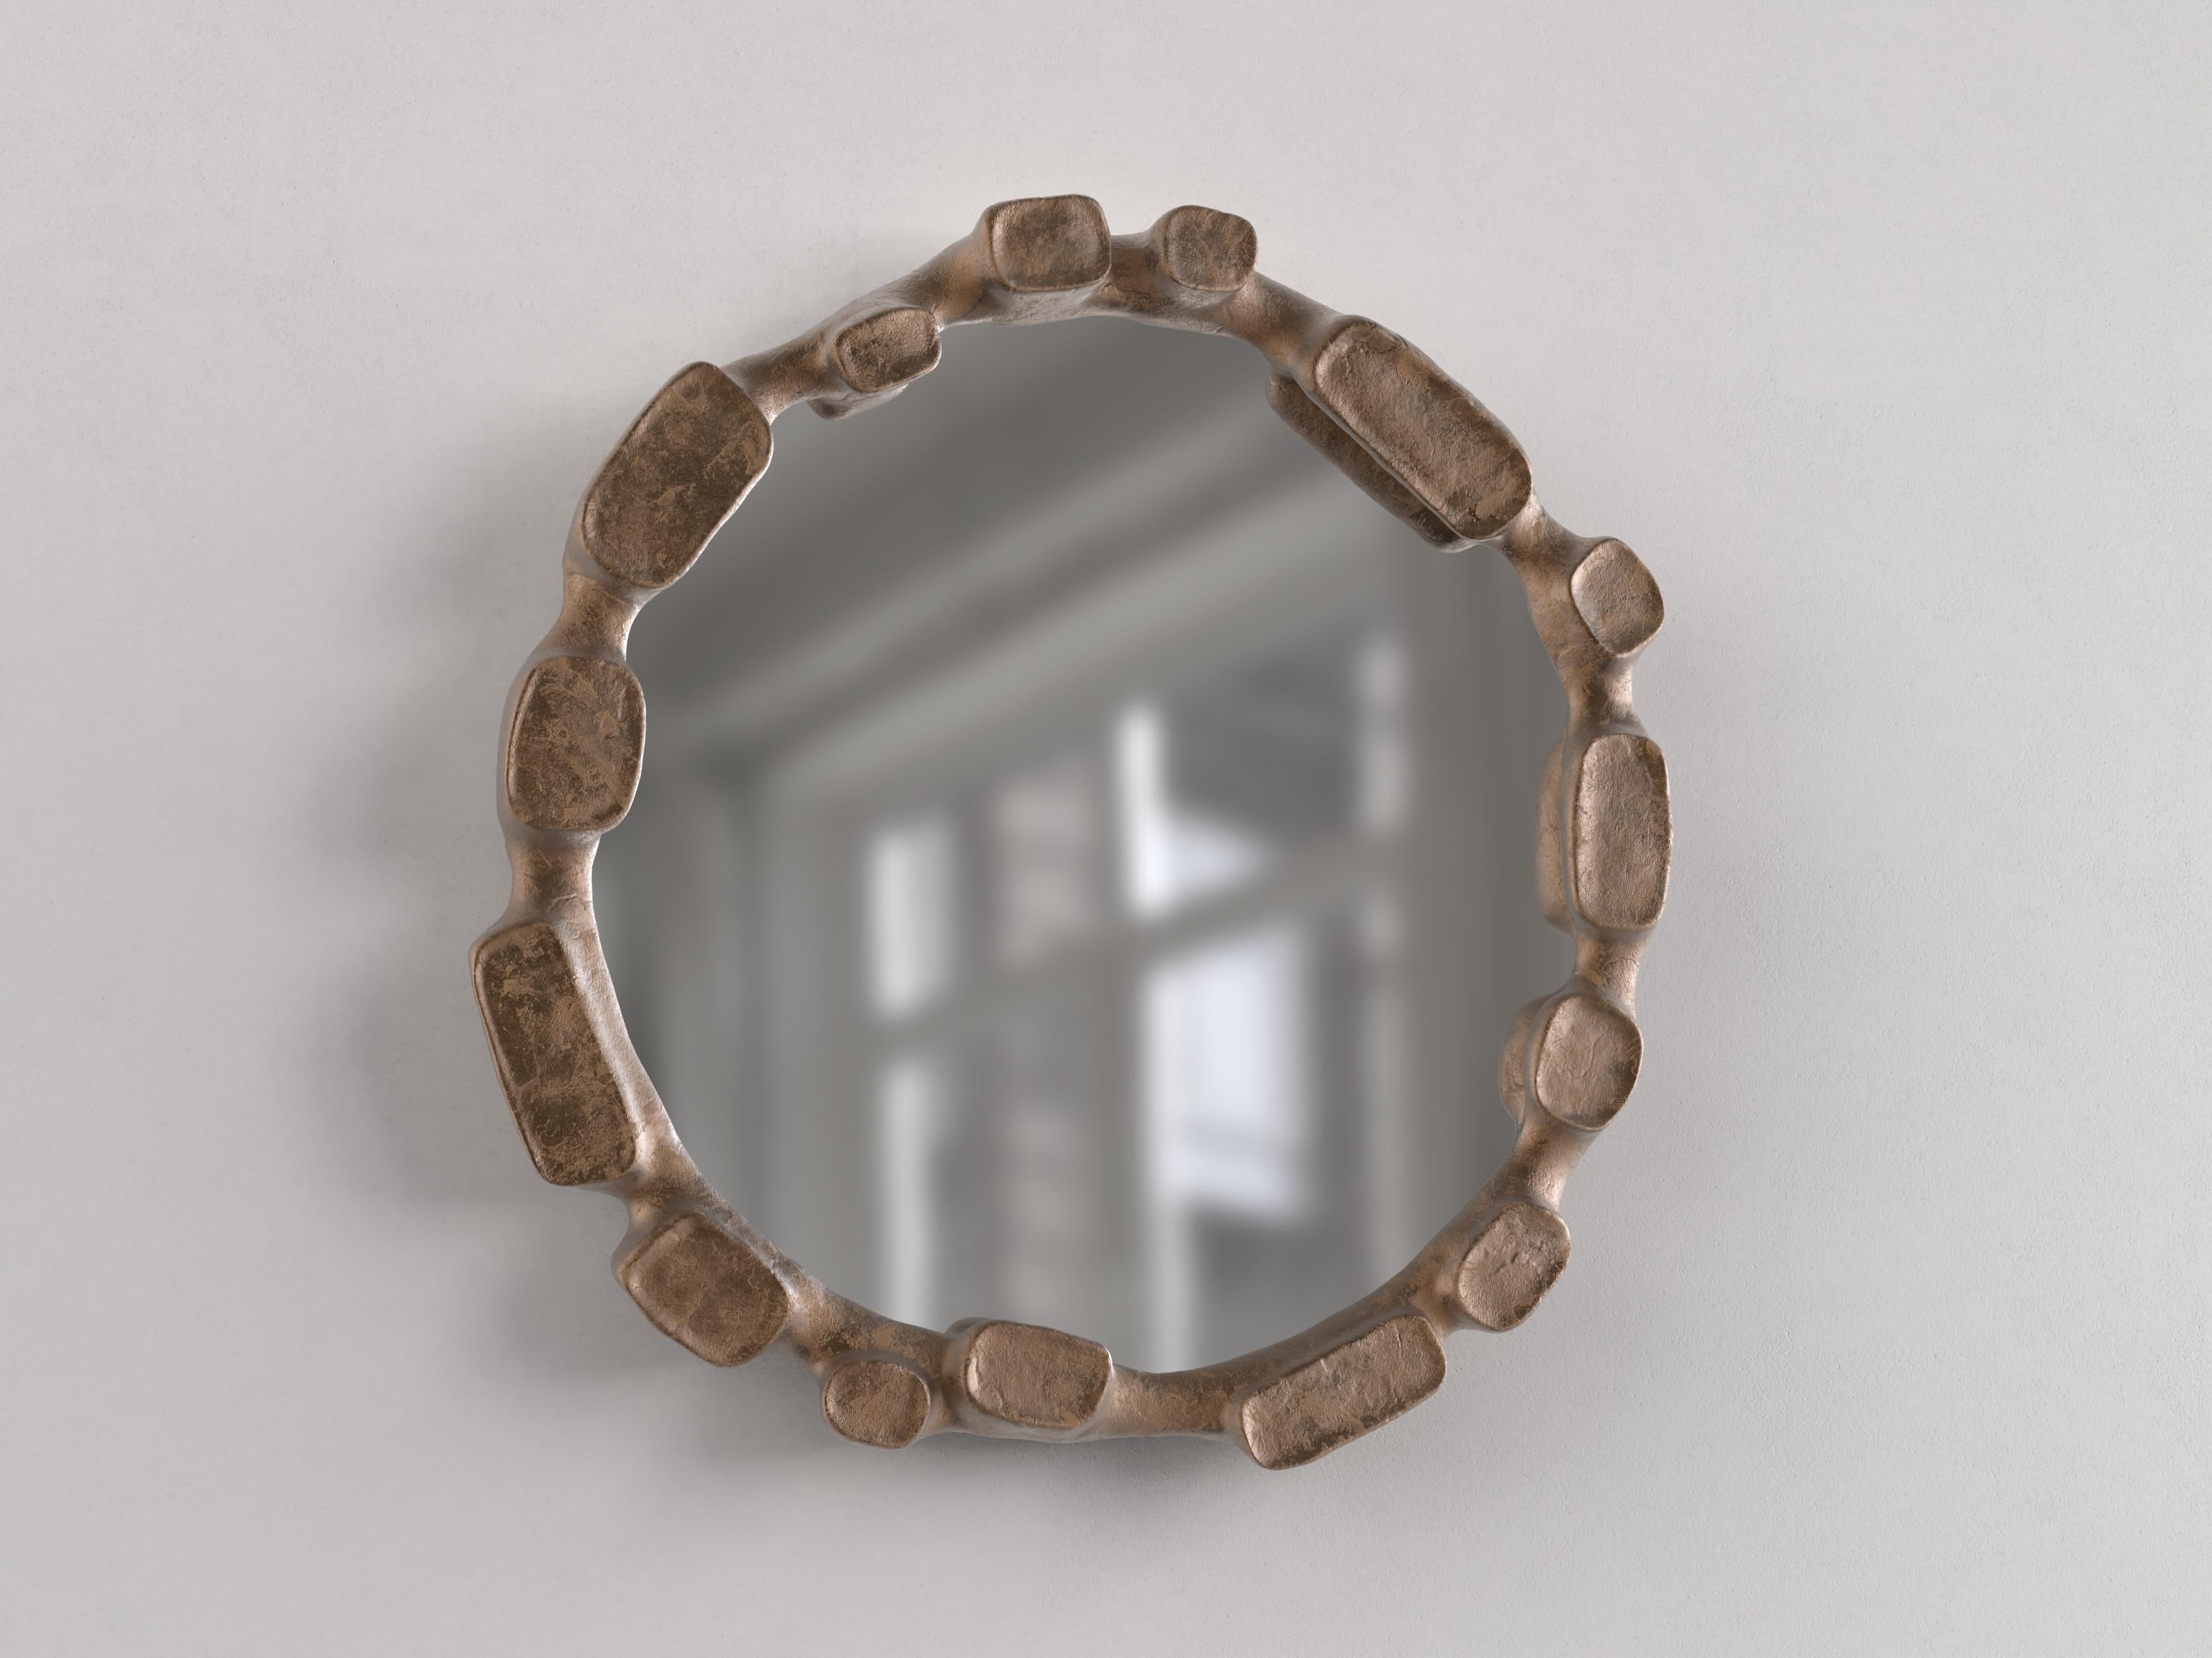 Mare V1 Wall Mirror by Edizione Limitata
Limited edition of 15+3. Signed and numbered.
Dimensions: D 6 x W 78 x H 78 cm
Materials: Bronze and mirror.

Edizione Limitata, that is to say “Limited Edition”, is a brand promoting and developing objects